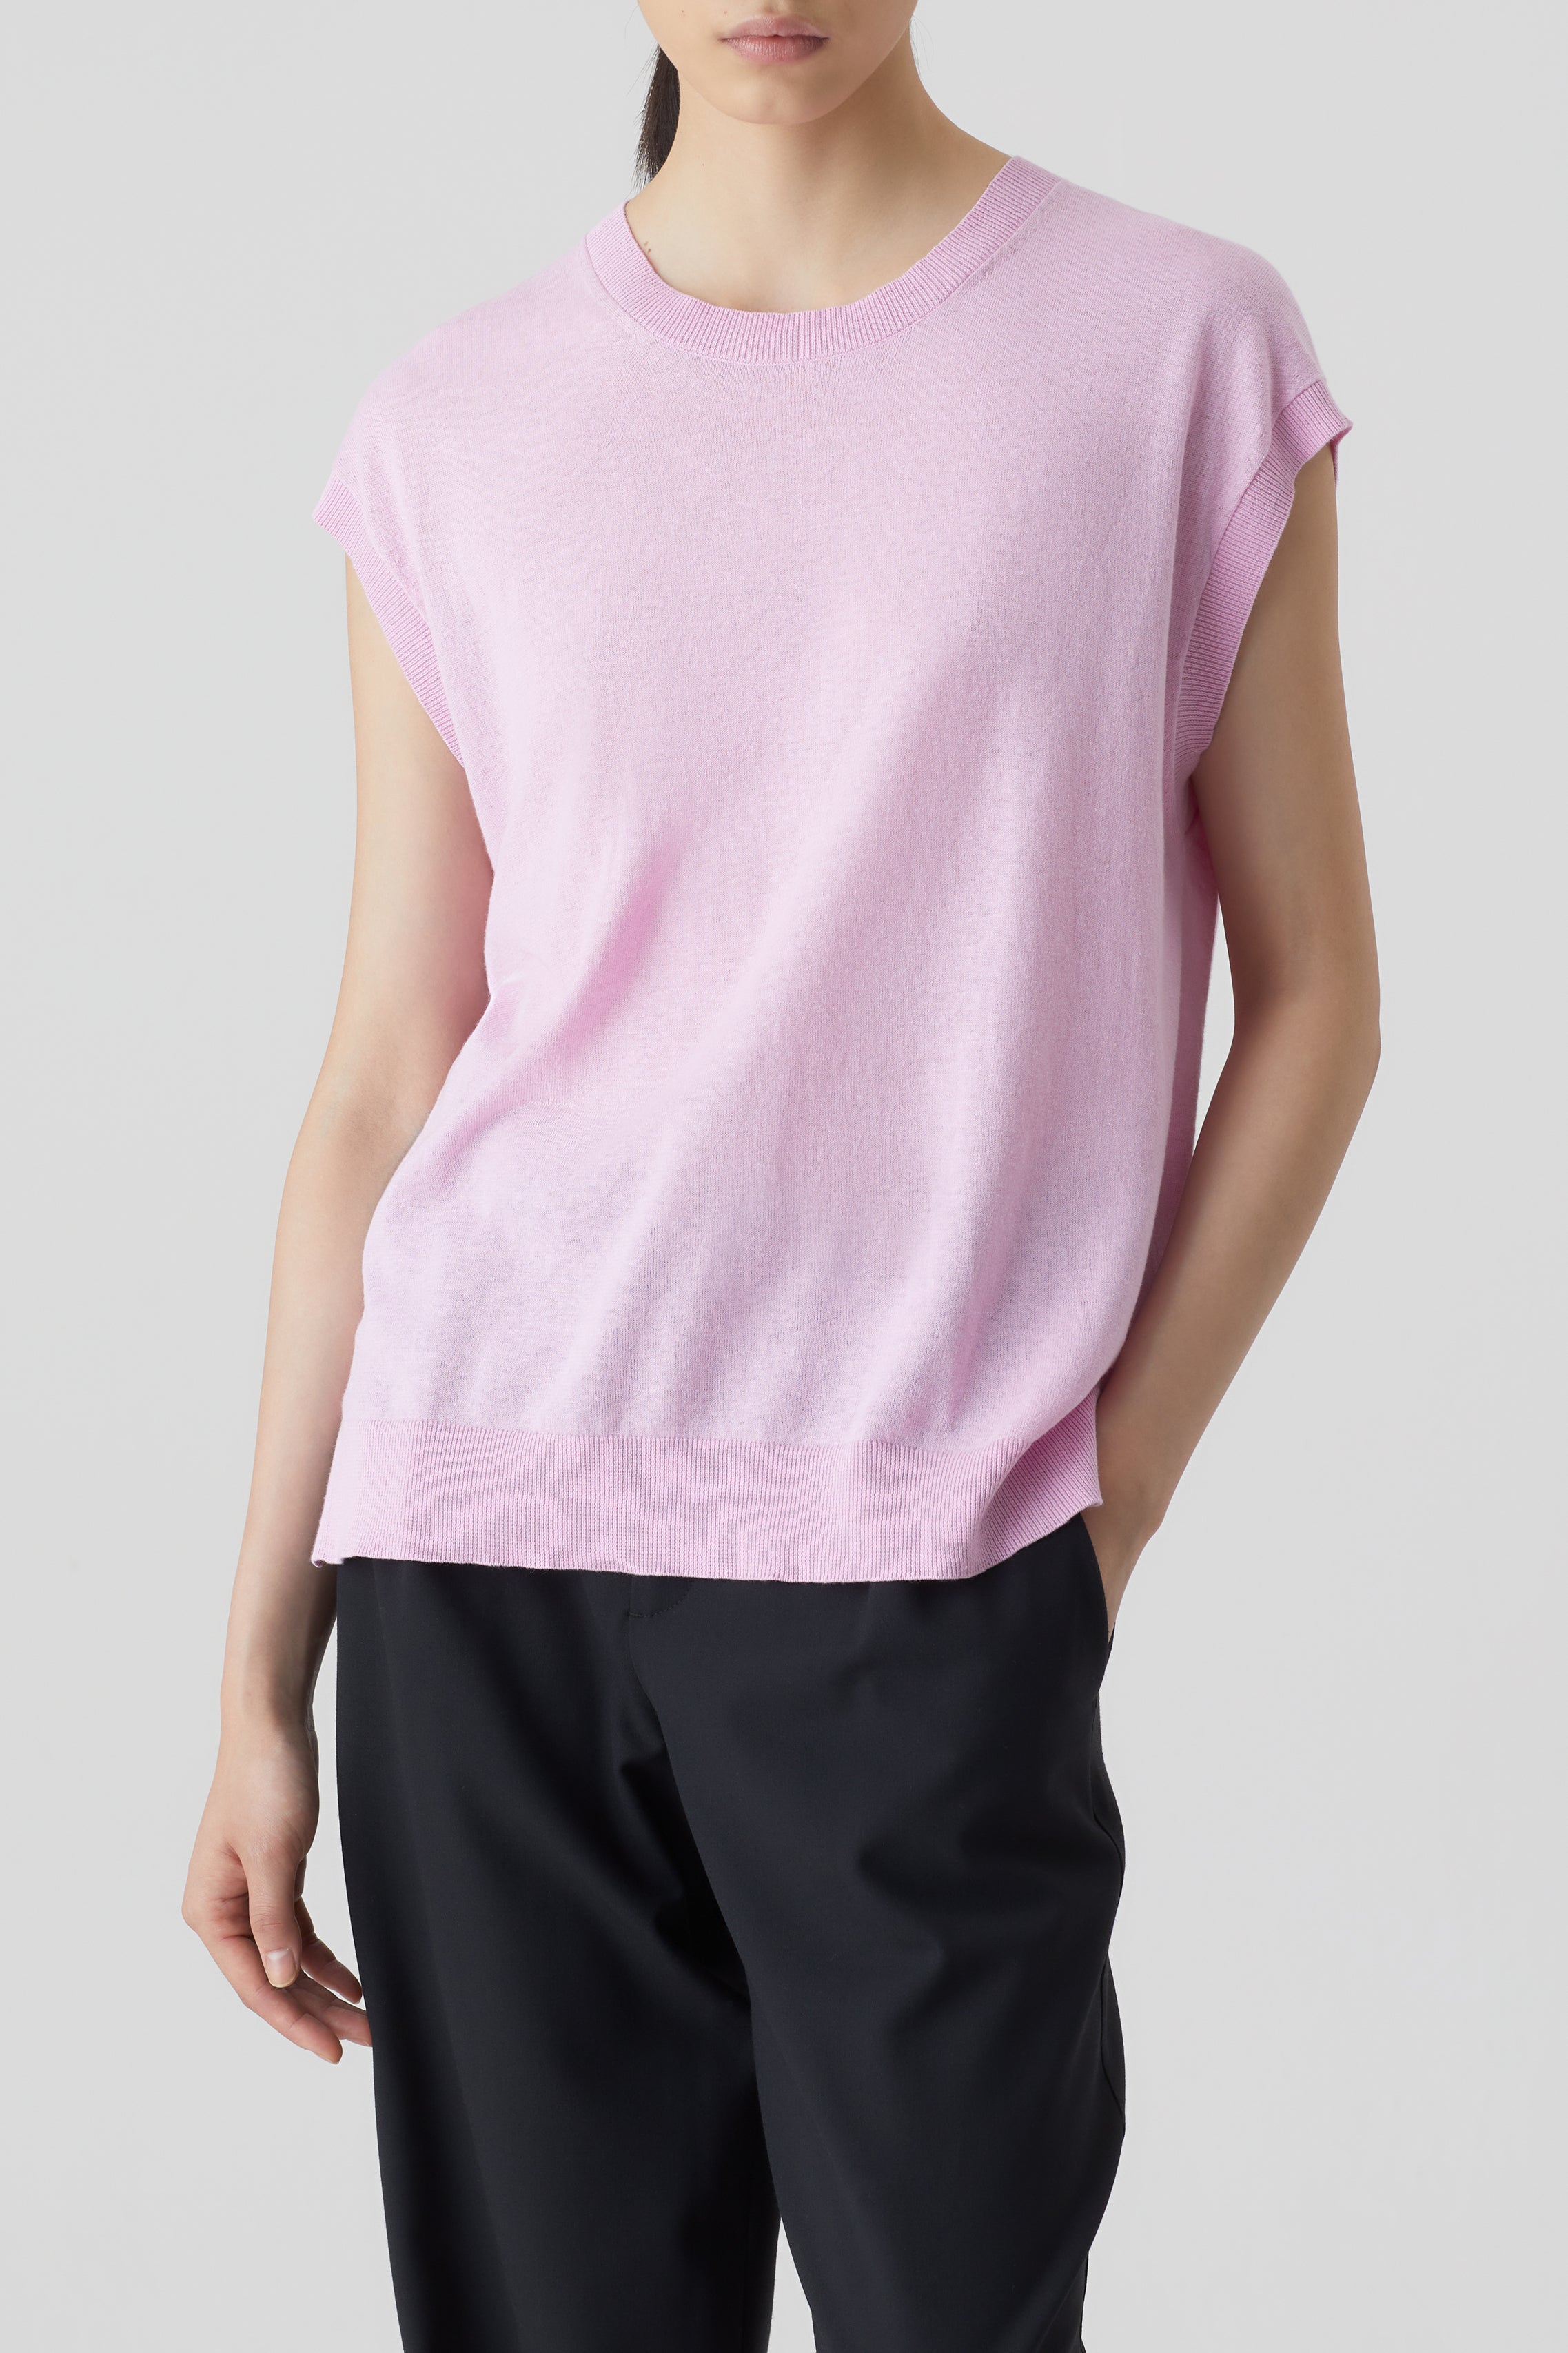 CLOSED-OUTLET-SALE-SLEEVELESS-TOP-KNITS-Strick-ARCHIVE-COLLECTION.jpg